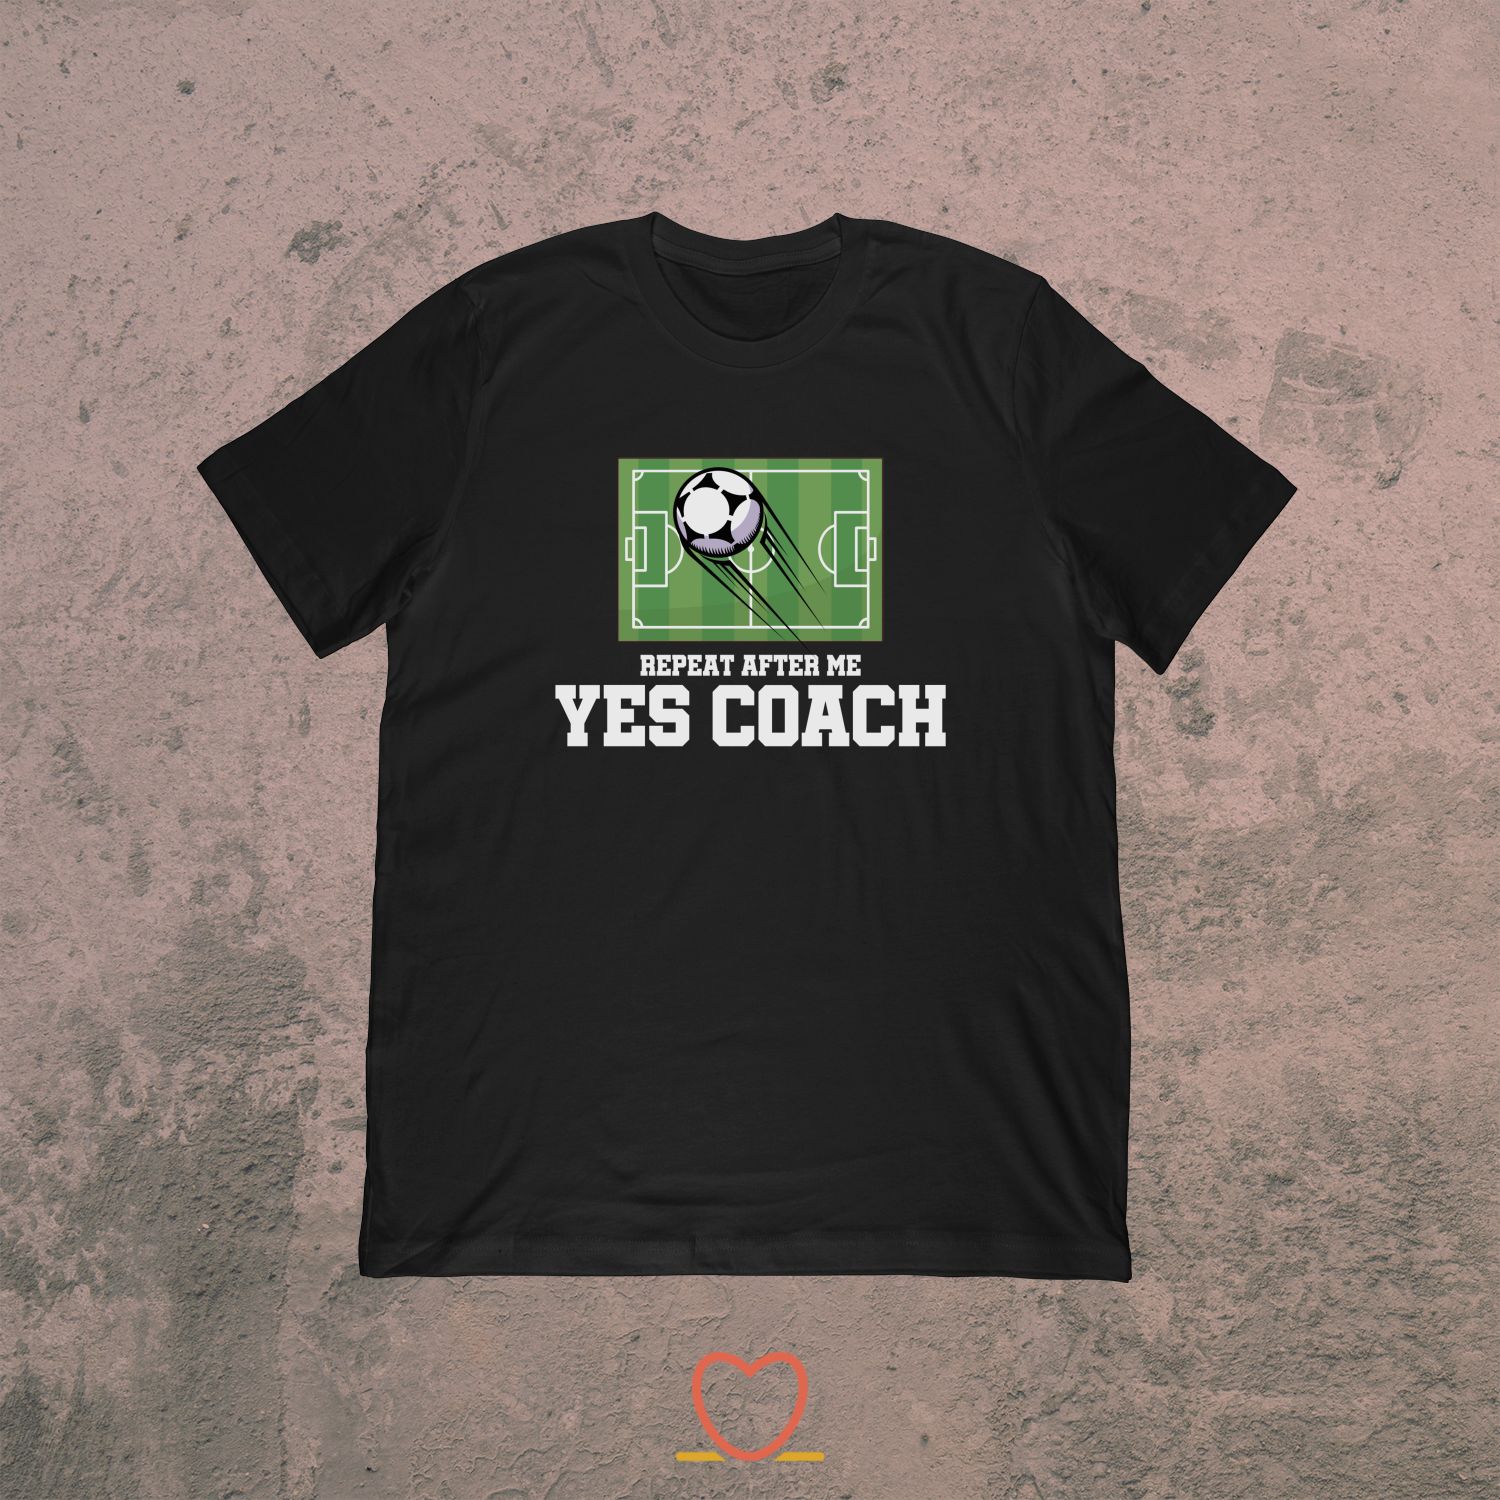 Repeat After Me Yes Coach – Soccer Coach Tee